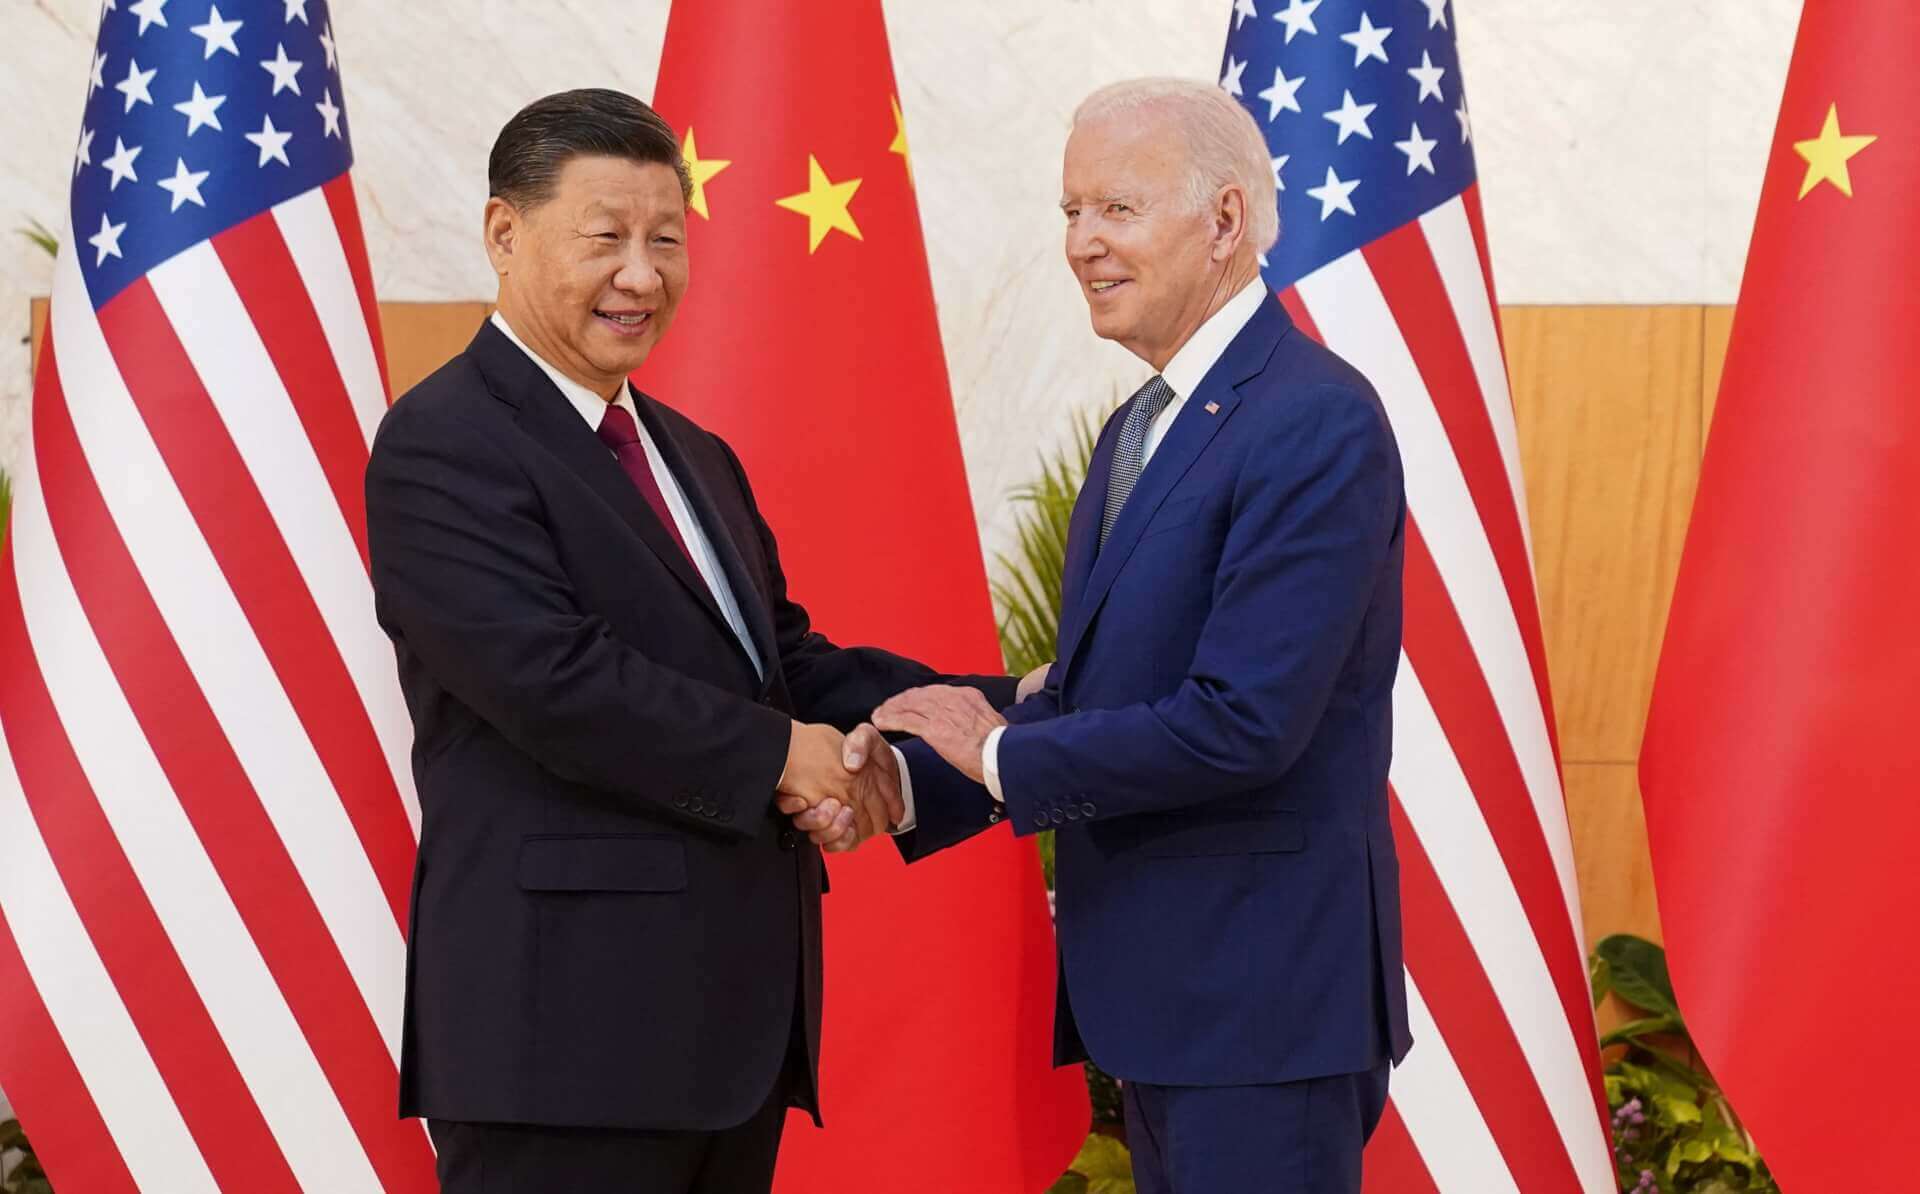 Xi Warns Biden Crossing ‘Red Line’ on Taiwan Could Lead to ‘Collision’